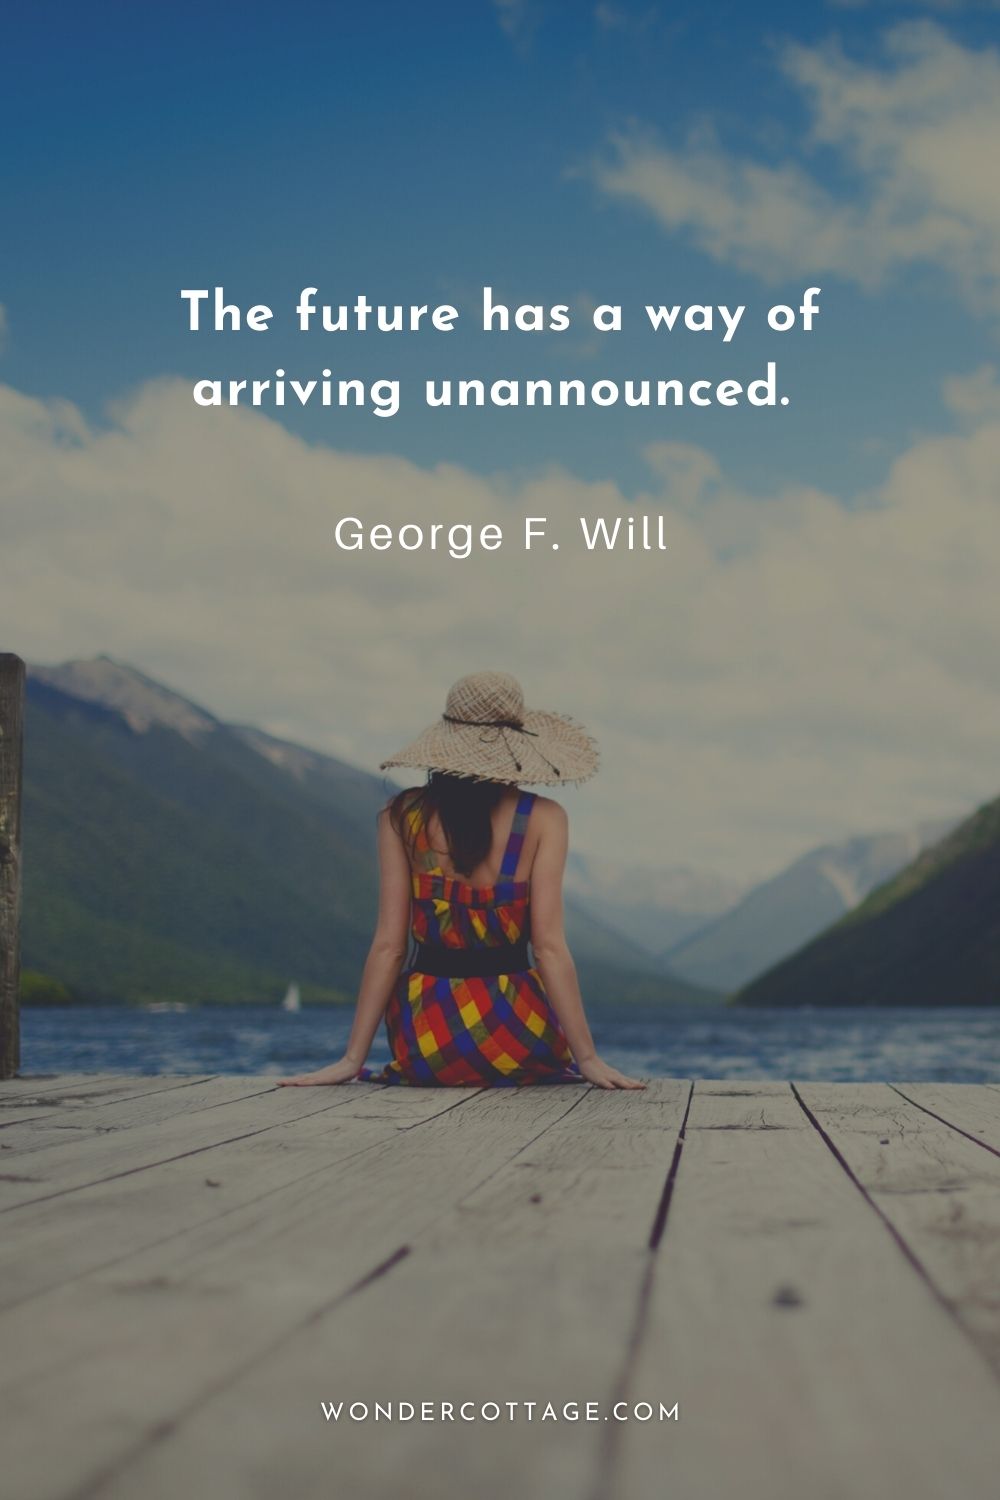 The future has a way of arriving unannounced. George F. Will